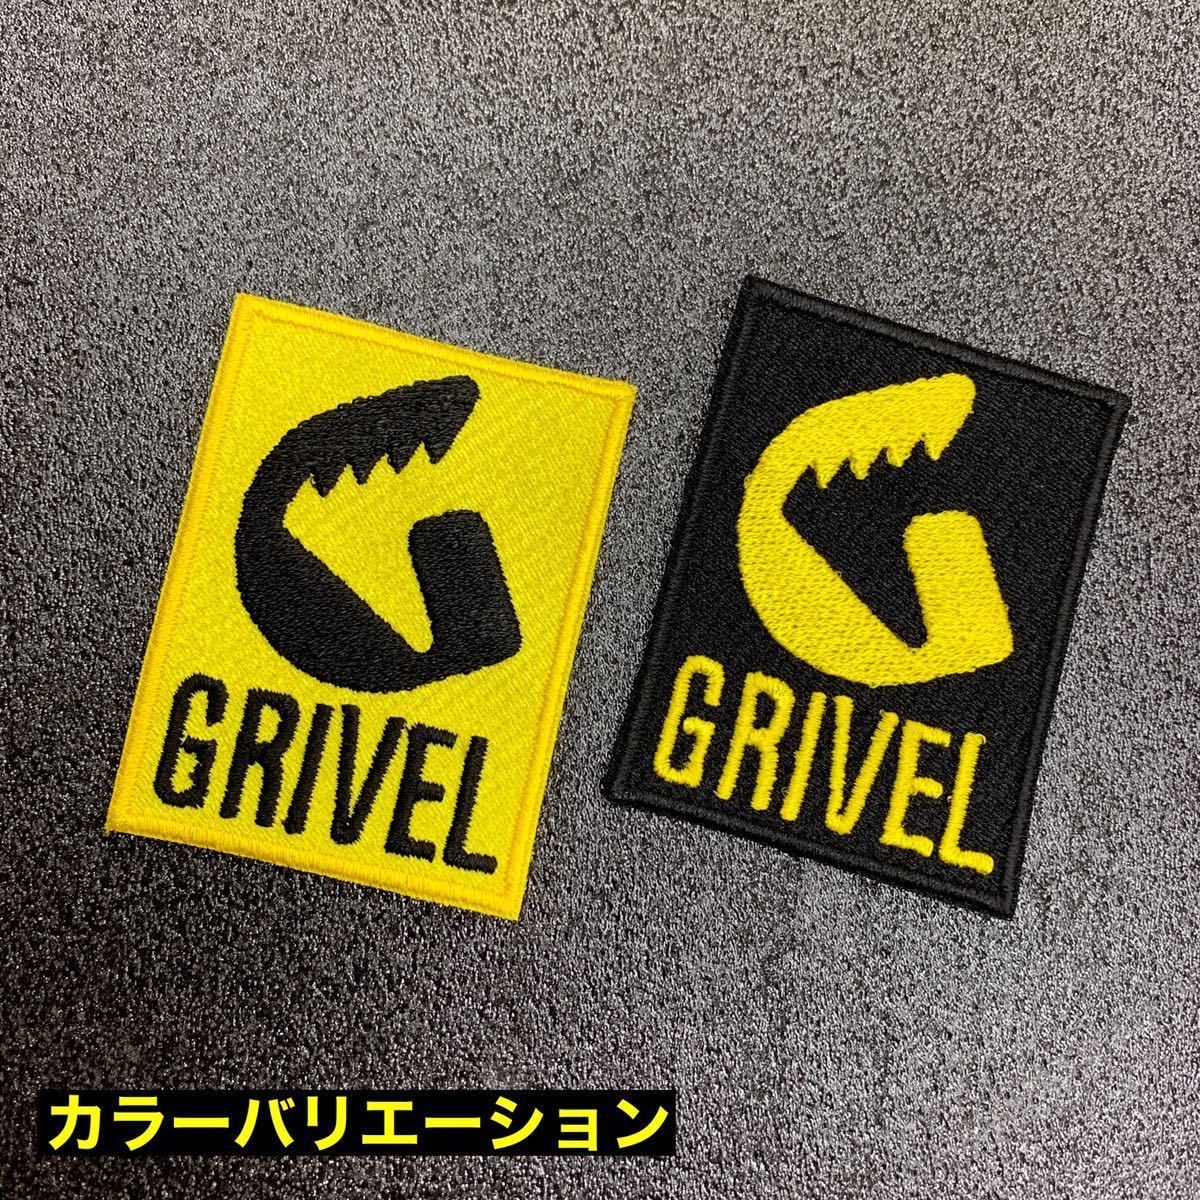  Gris bell GRIVEL Logo yellow iron badge patch - trekking mountain climbing rock-climbing camp sonntagpatches fixed form mail free shipping 